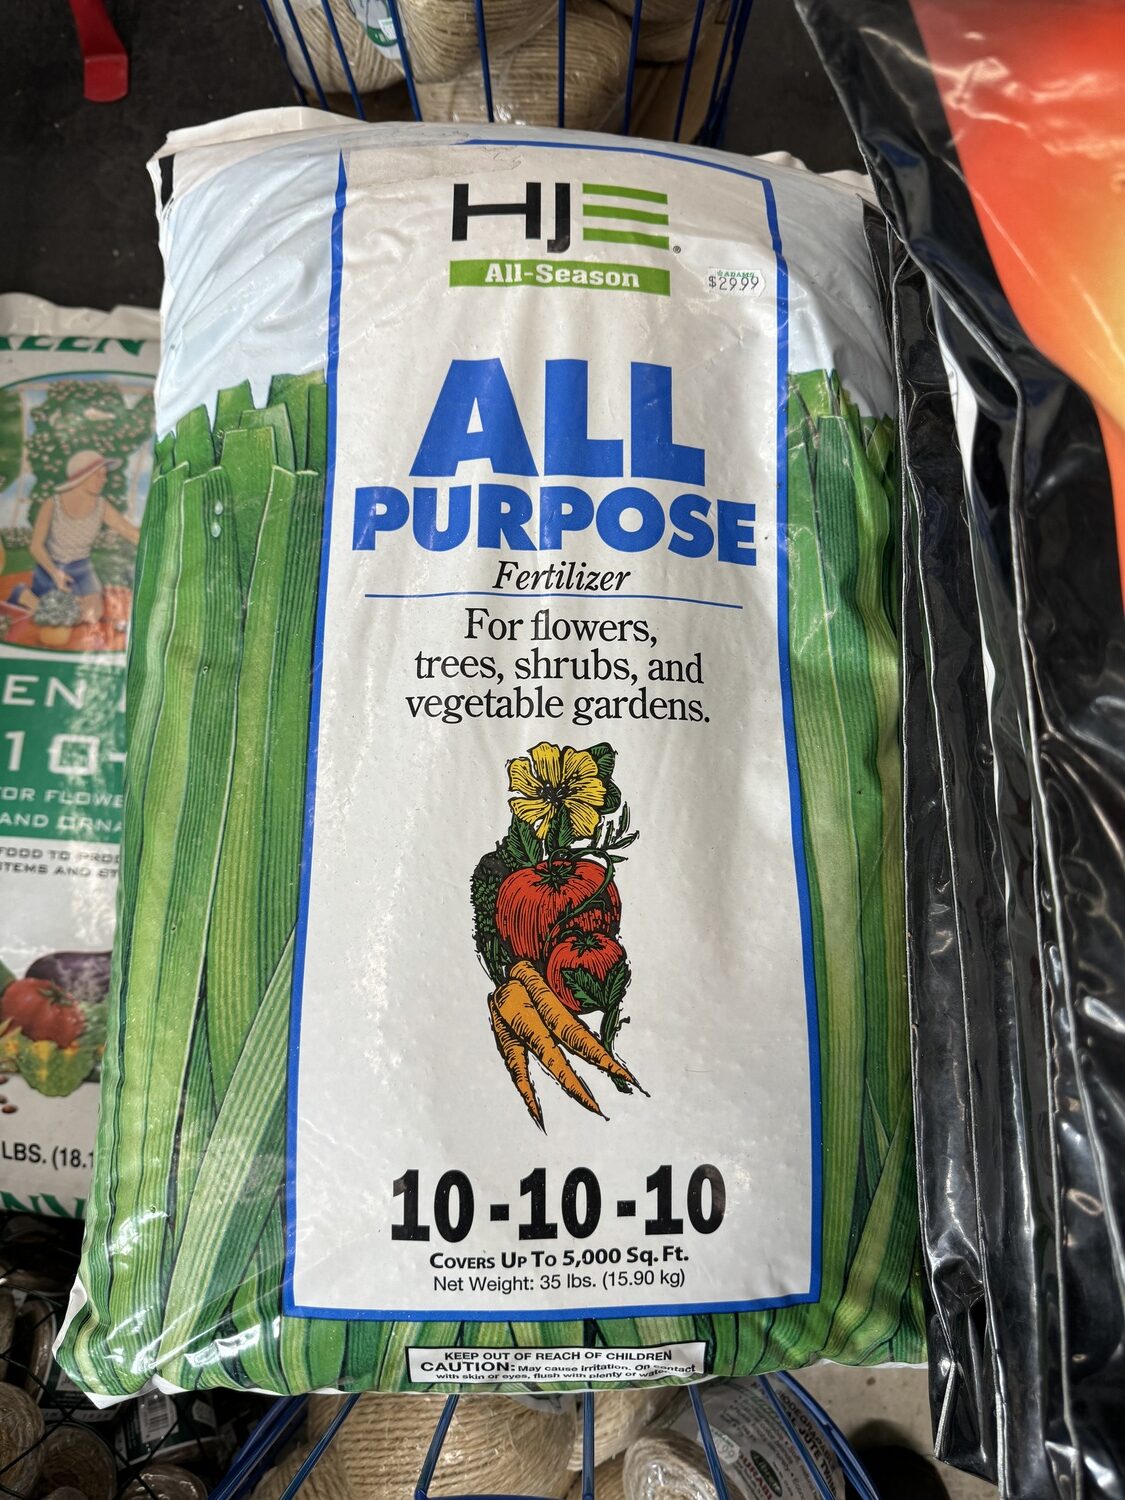 When a fertilizer has the N-P-K in equal numbers like this bag of 10-10-10, we consider it to be a 